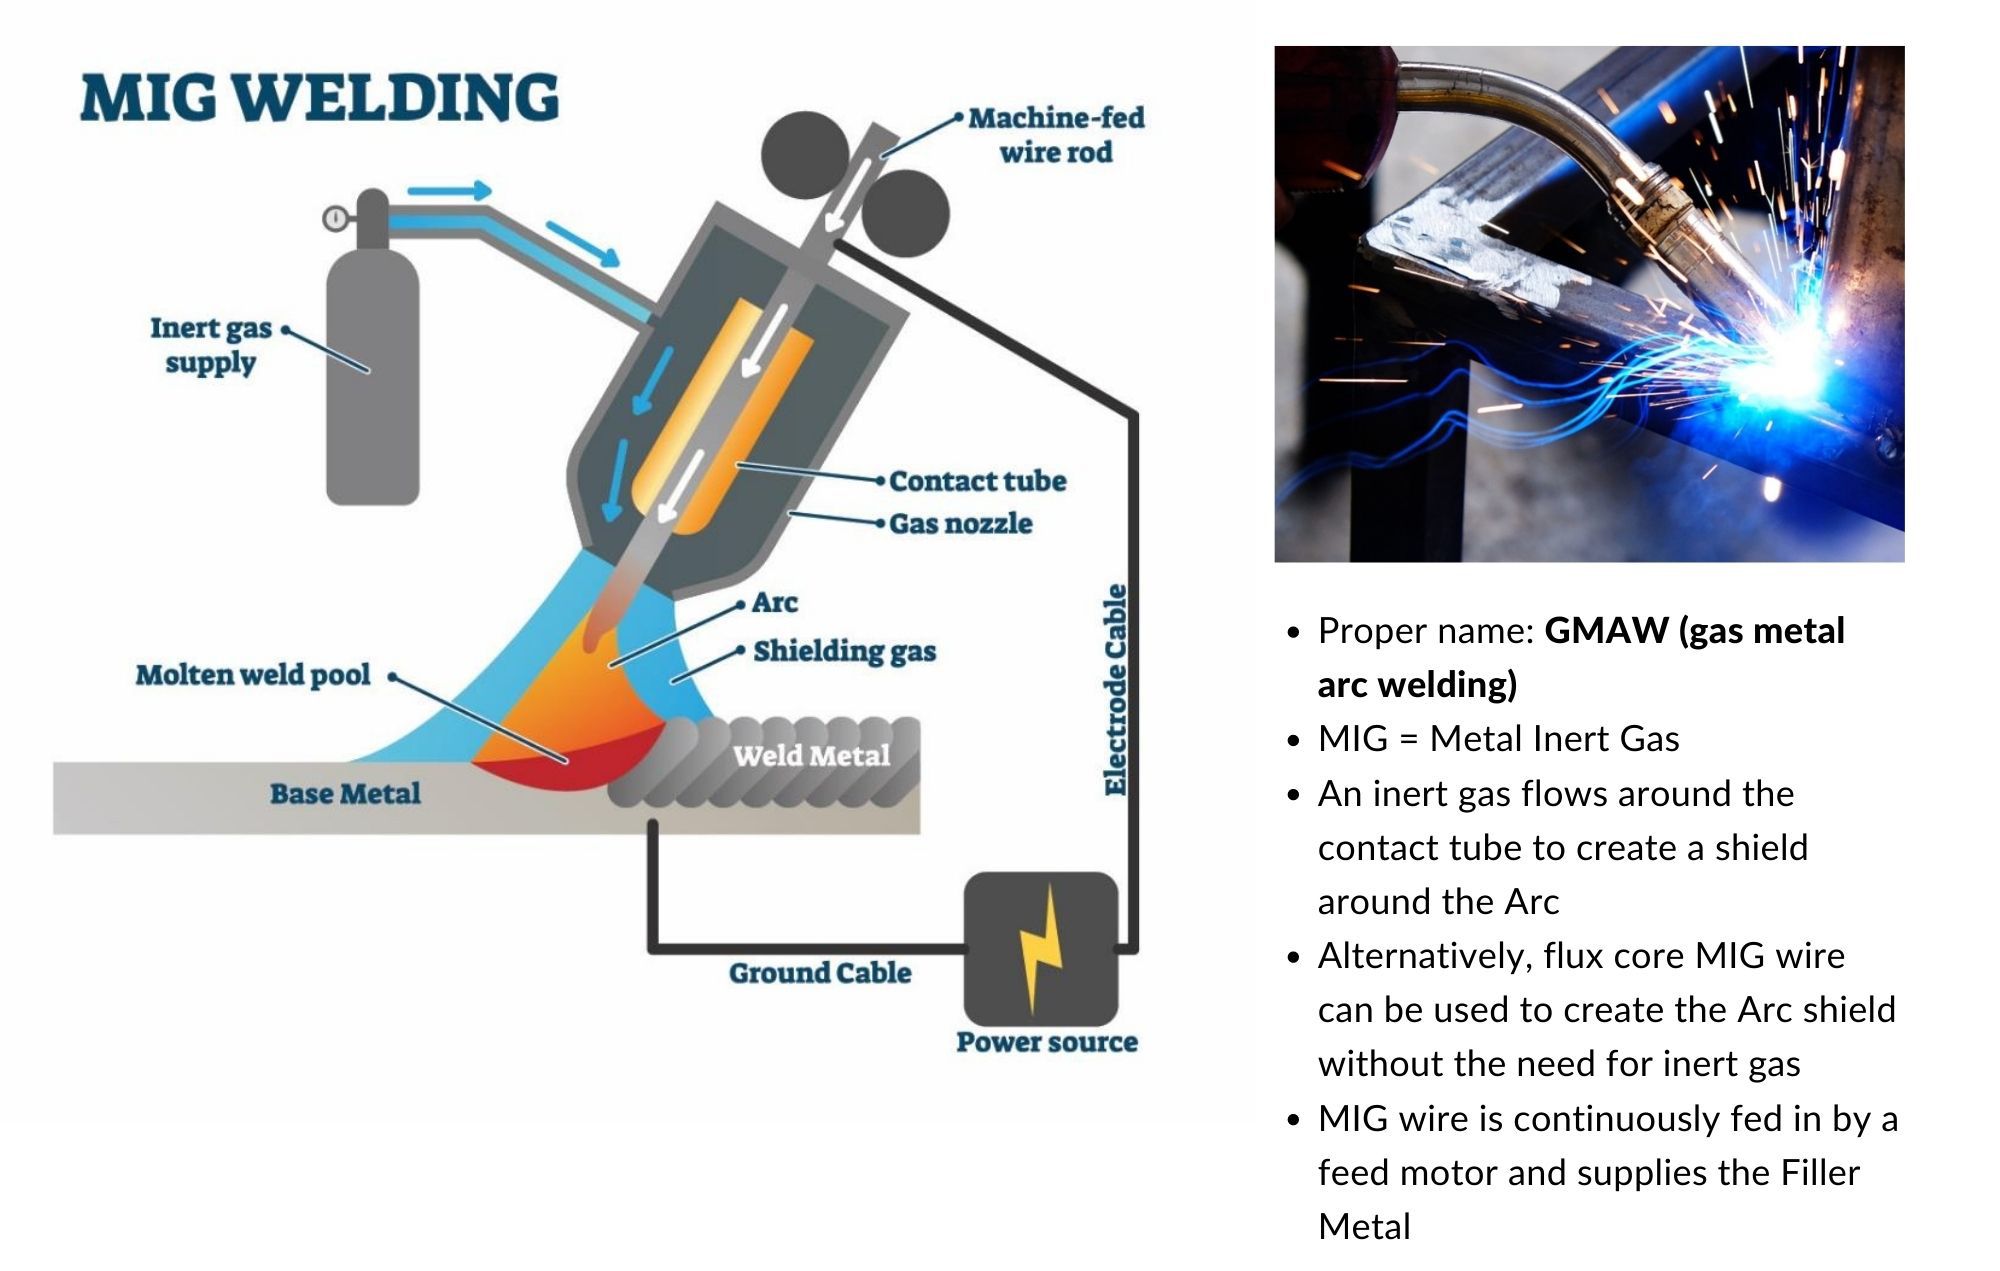 mig welding  & textImage 1. An illustration of how MIG welding works. 